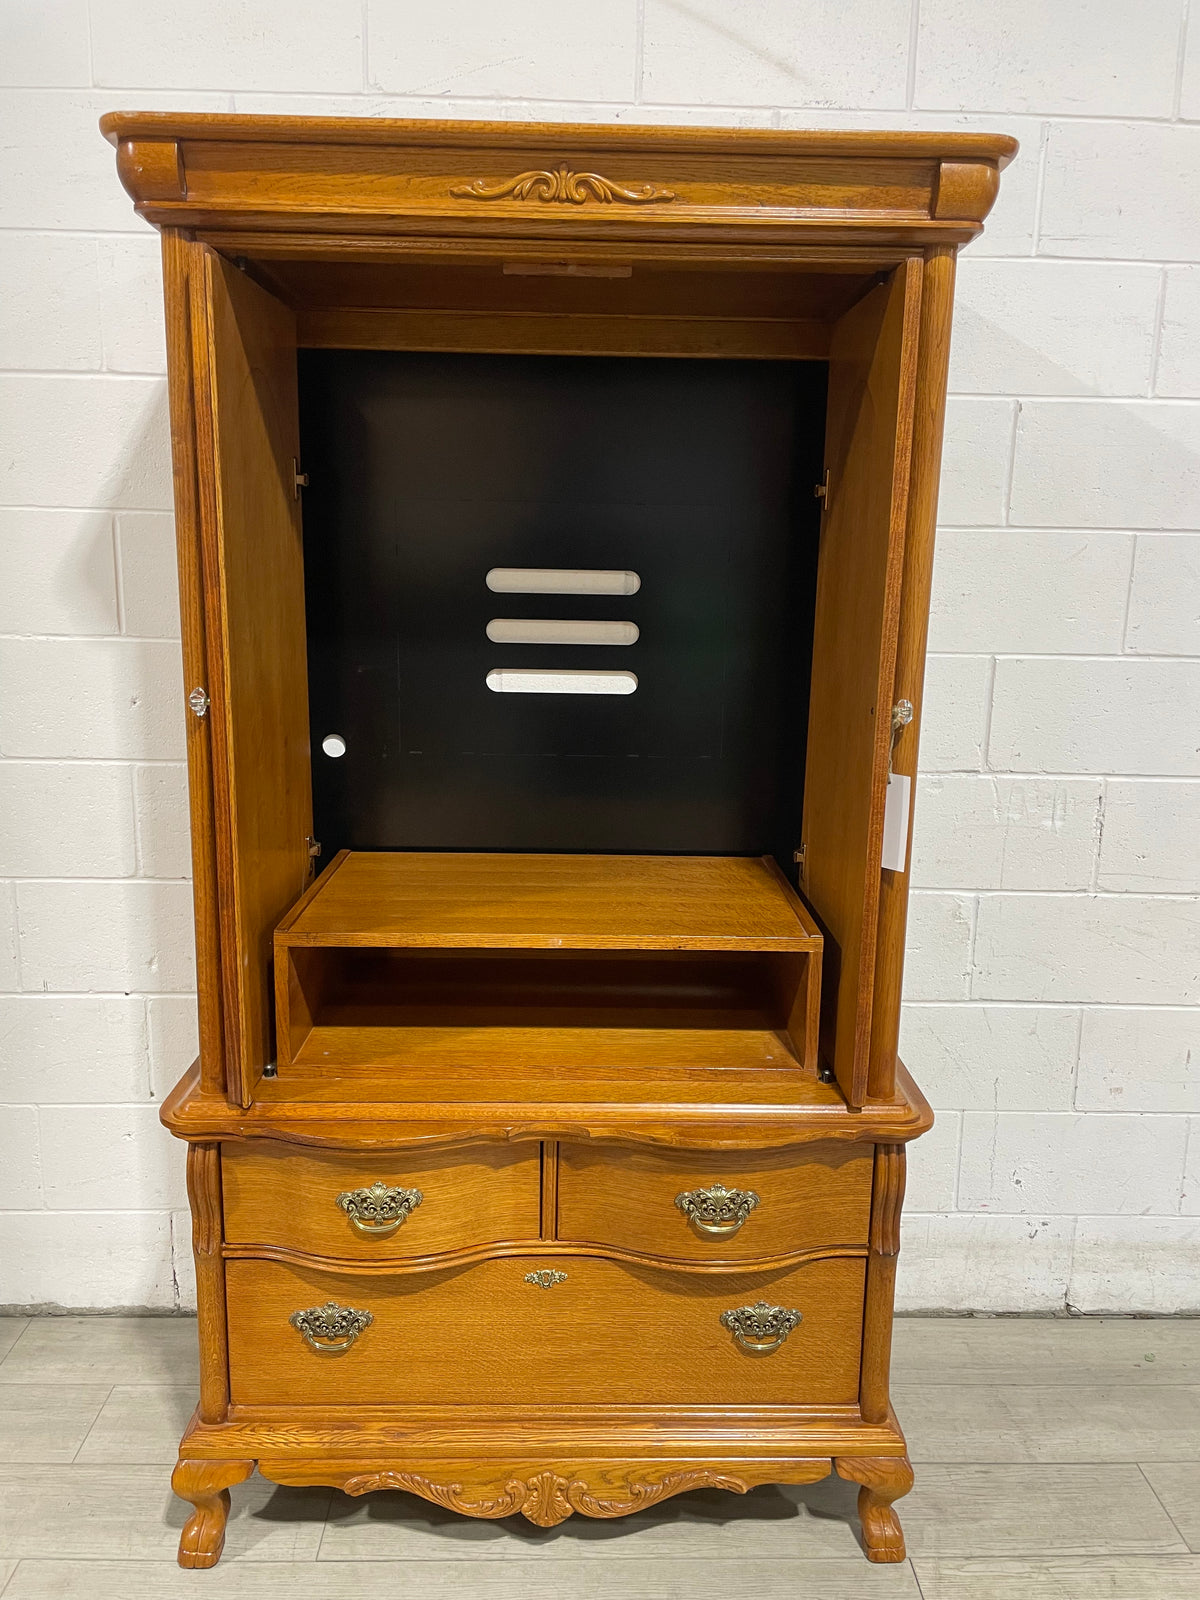 Vintage Armoire w/ 3 Drawers